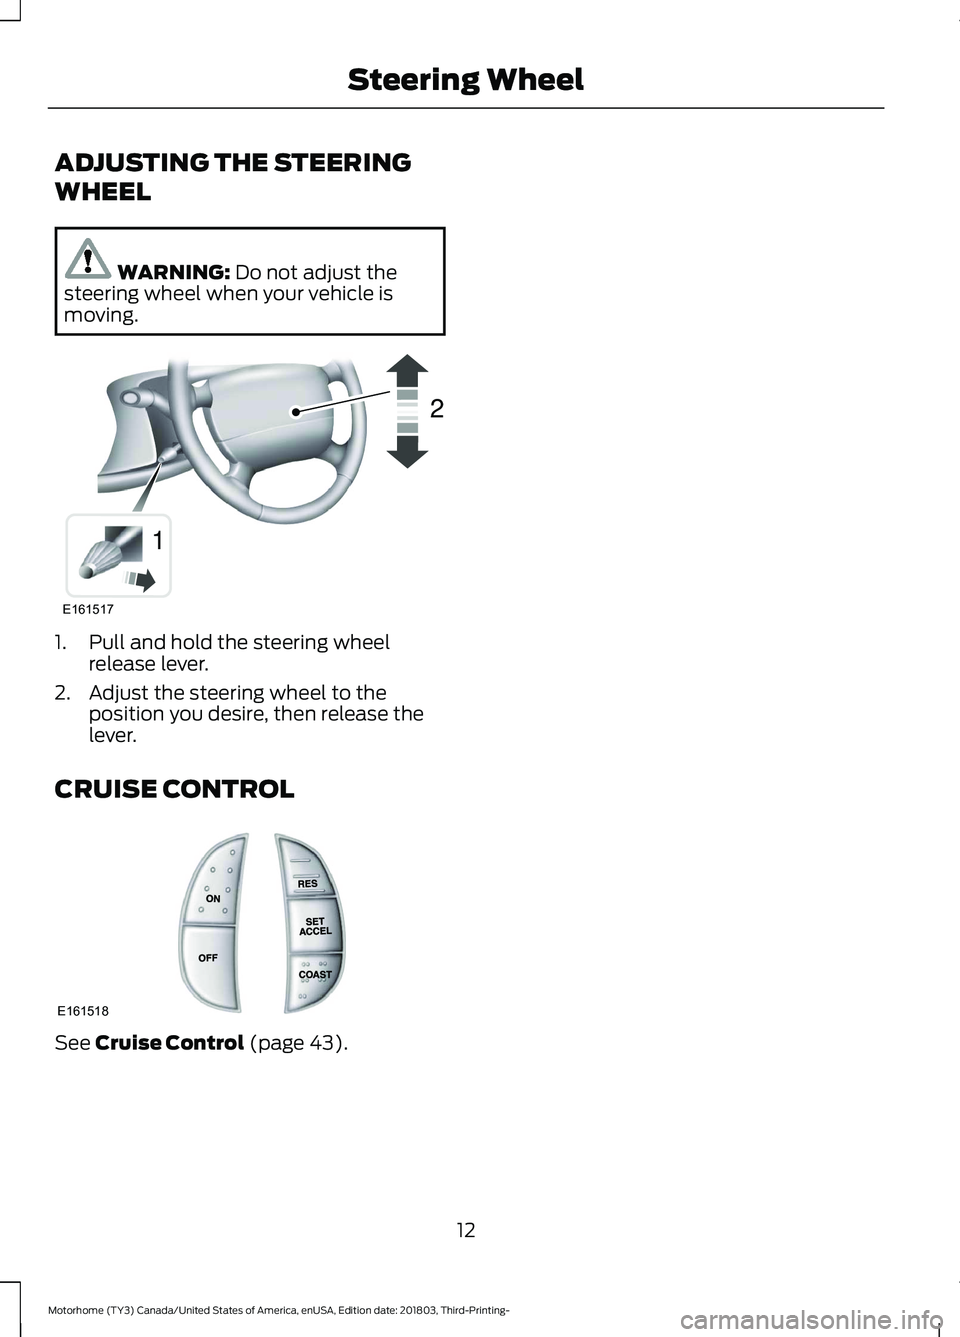 FORD F-53 2019 User Guide ADJUSTING THE STEERING
WHEEL
WARNING: Do not adjust thesteering wheel when your vehicle ismoving.
1.Pull and hold the steering wheelrelease lever.
2.Adjust the steering wheel to theposition you desire